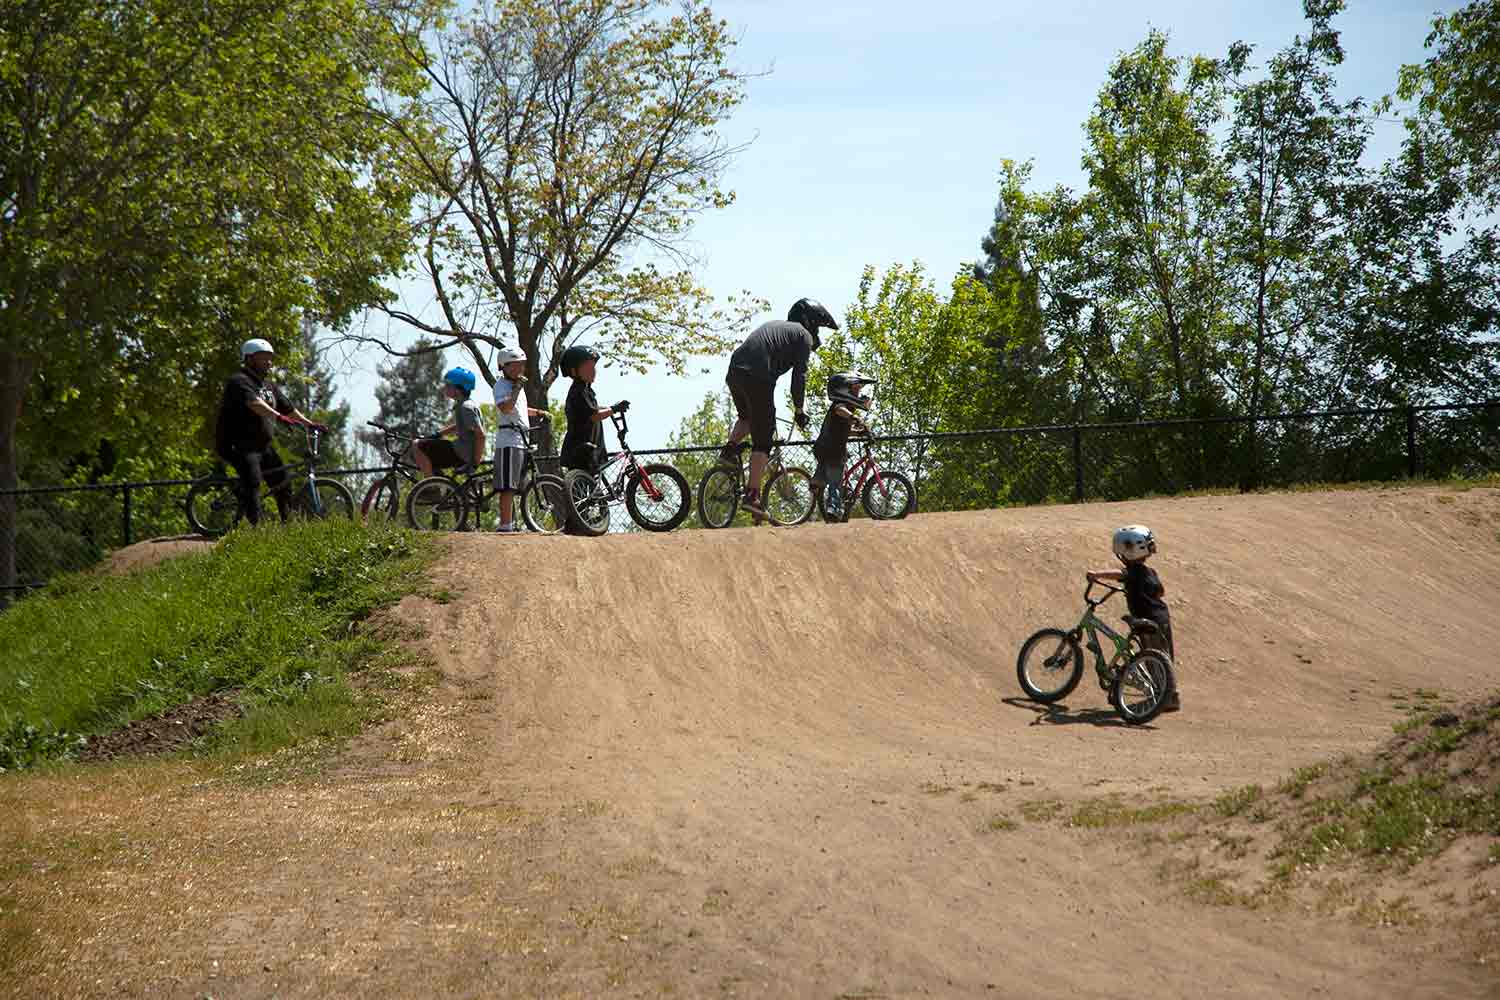 Big and Little line up to ride the berms at Calabazas Bike Park, San Jose, California